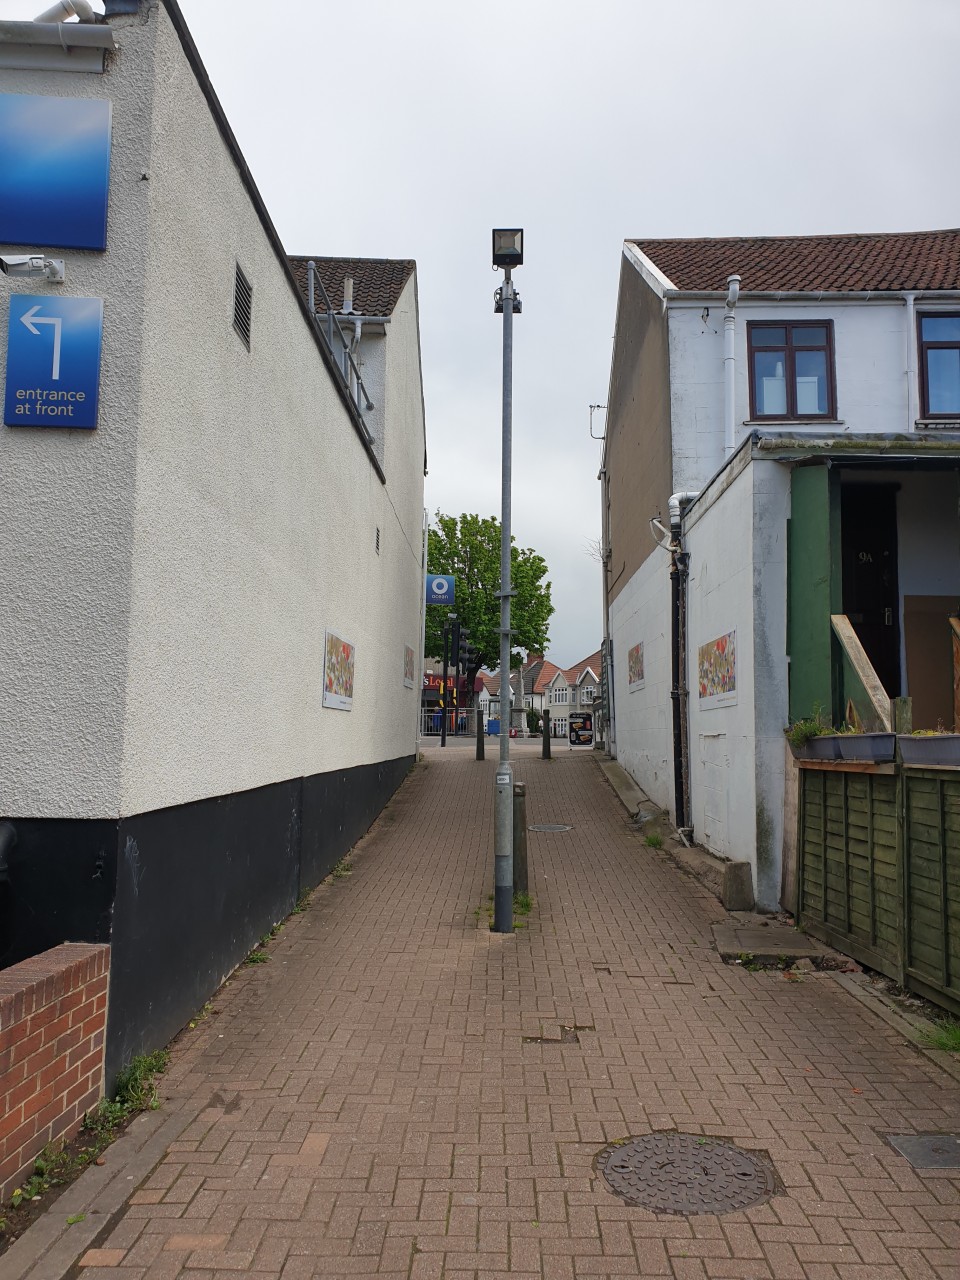 the Lighting Column in the lane leading from the Co-op car park to the pedestrian crossing on the Badminton Road.